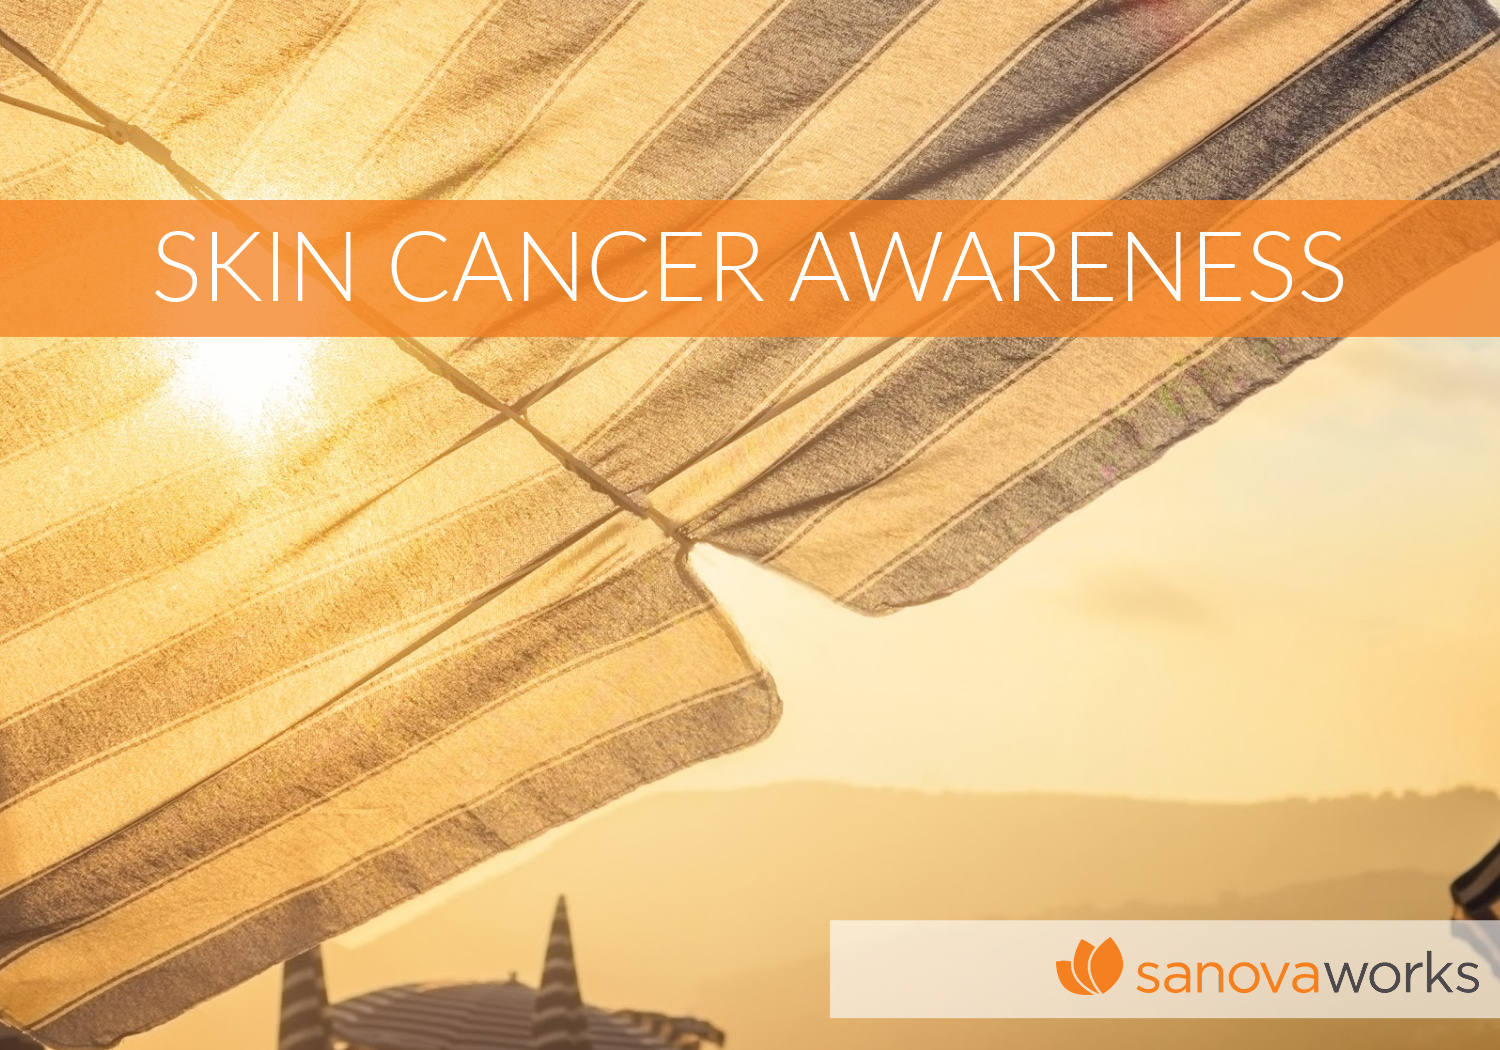 SKIN CANCER AWARENESS: EARLY DIAGNOSIS SAVES LIVES